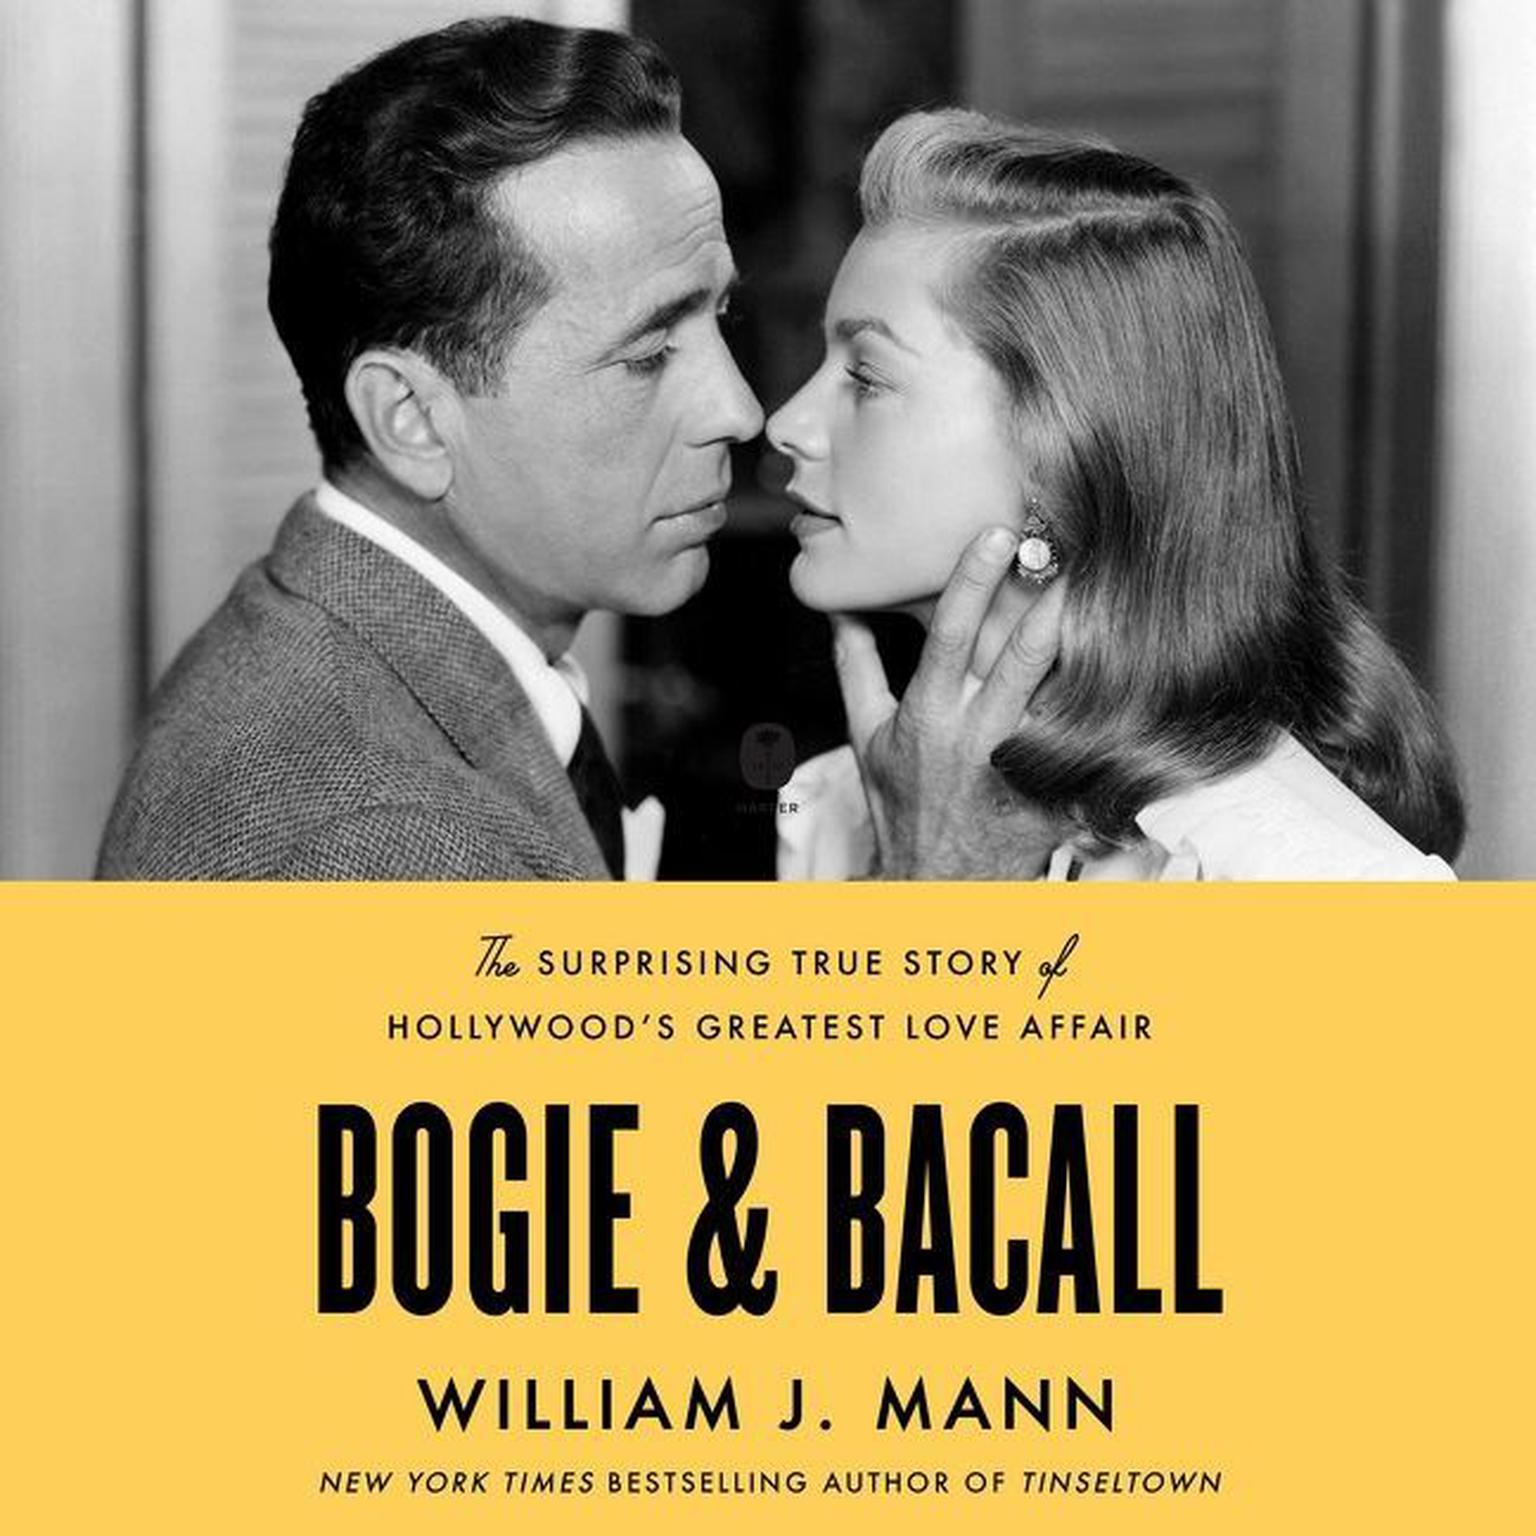 Bogie & Bacall: The Surprising True Story of Hollywood’s Greatest Love Affair Audiobook, by William J. Mann